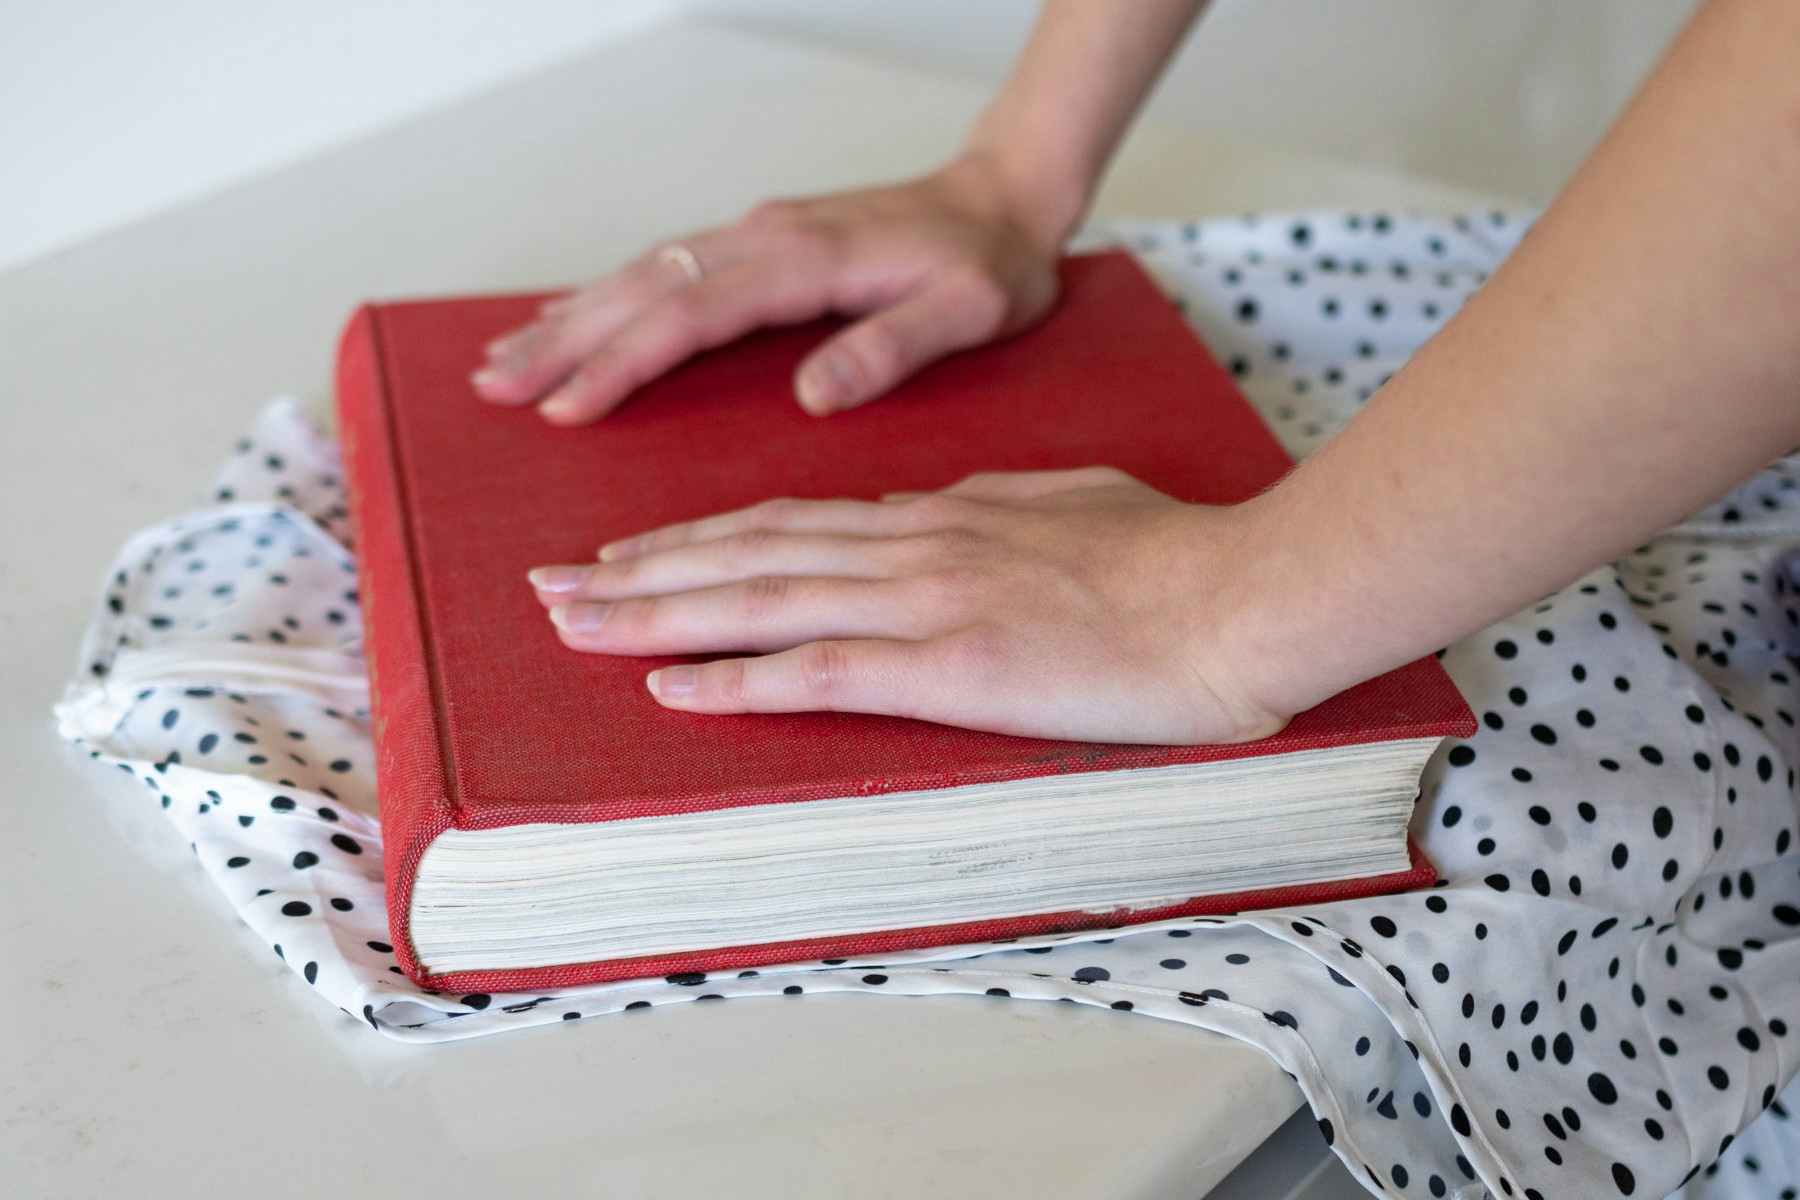 Woman pushing on a heavy book that's been placed over a wrinkled shirt